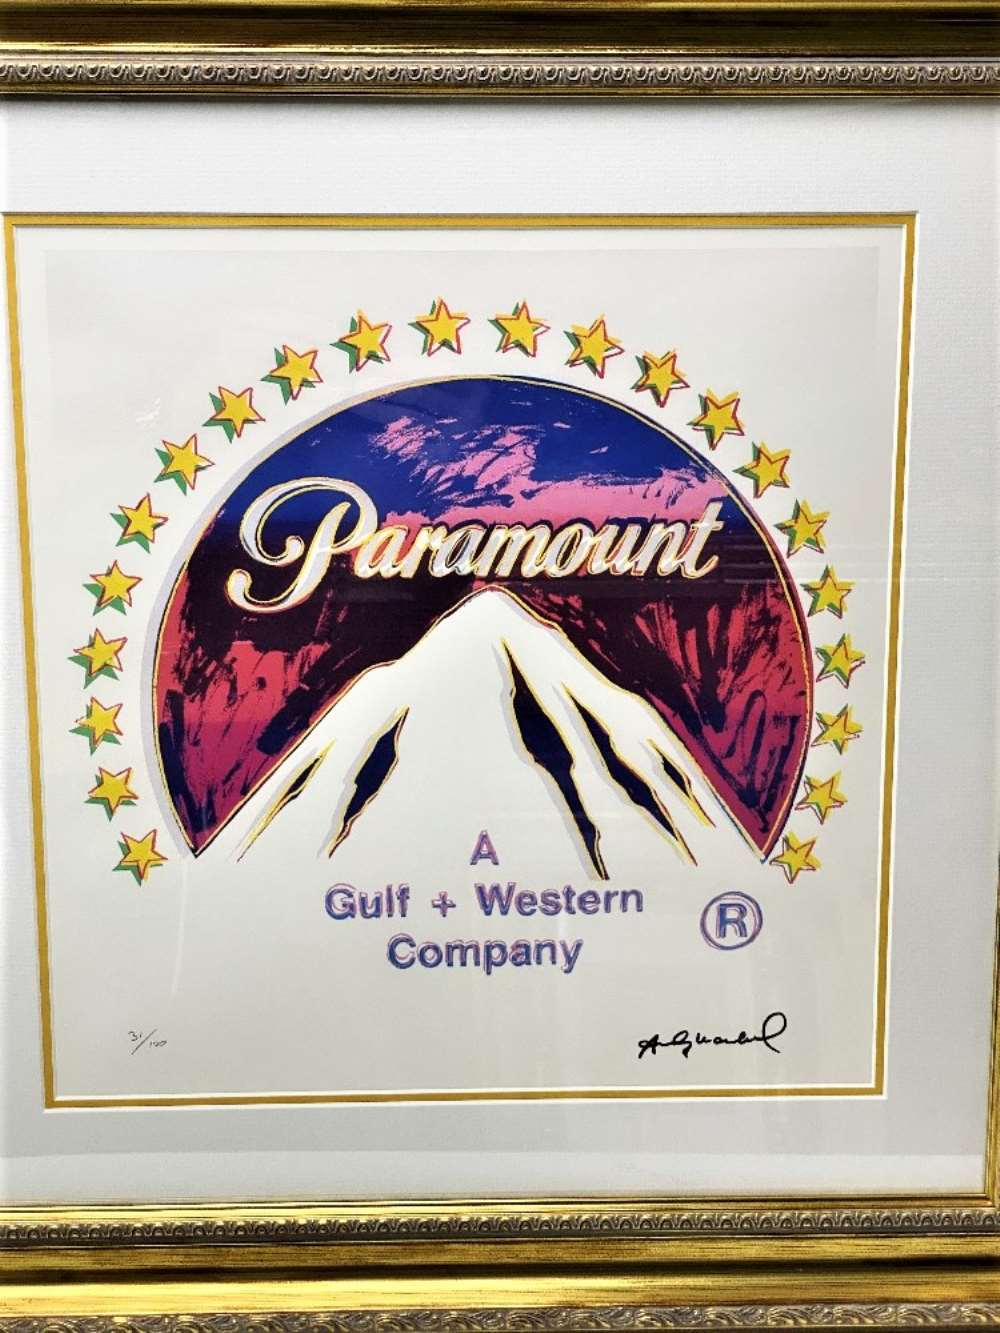 Andy Warhol-(1928-1987) "Paramount" Castelli NY Original Numbered Lithograph #31/100, Ornate Framed. - Image 2 of 6